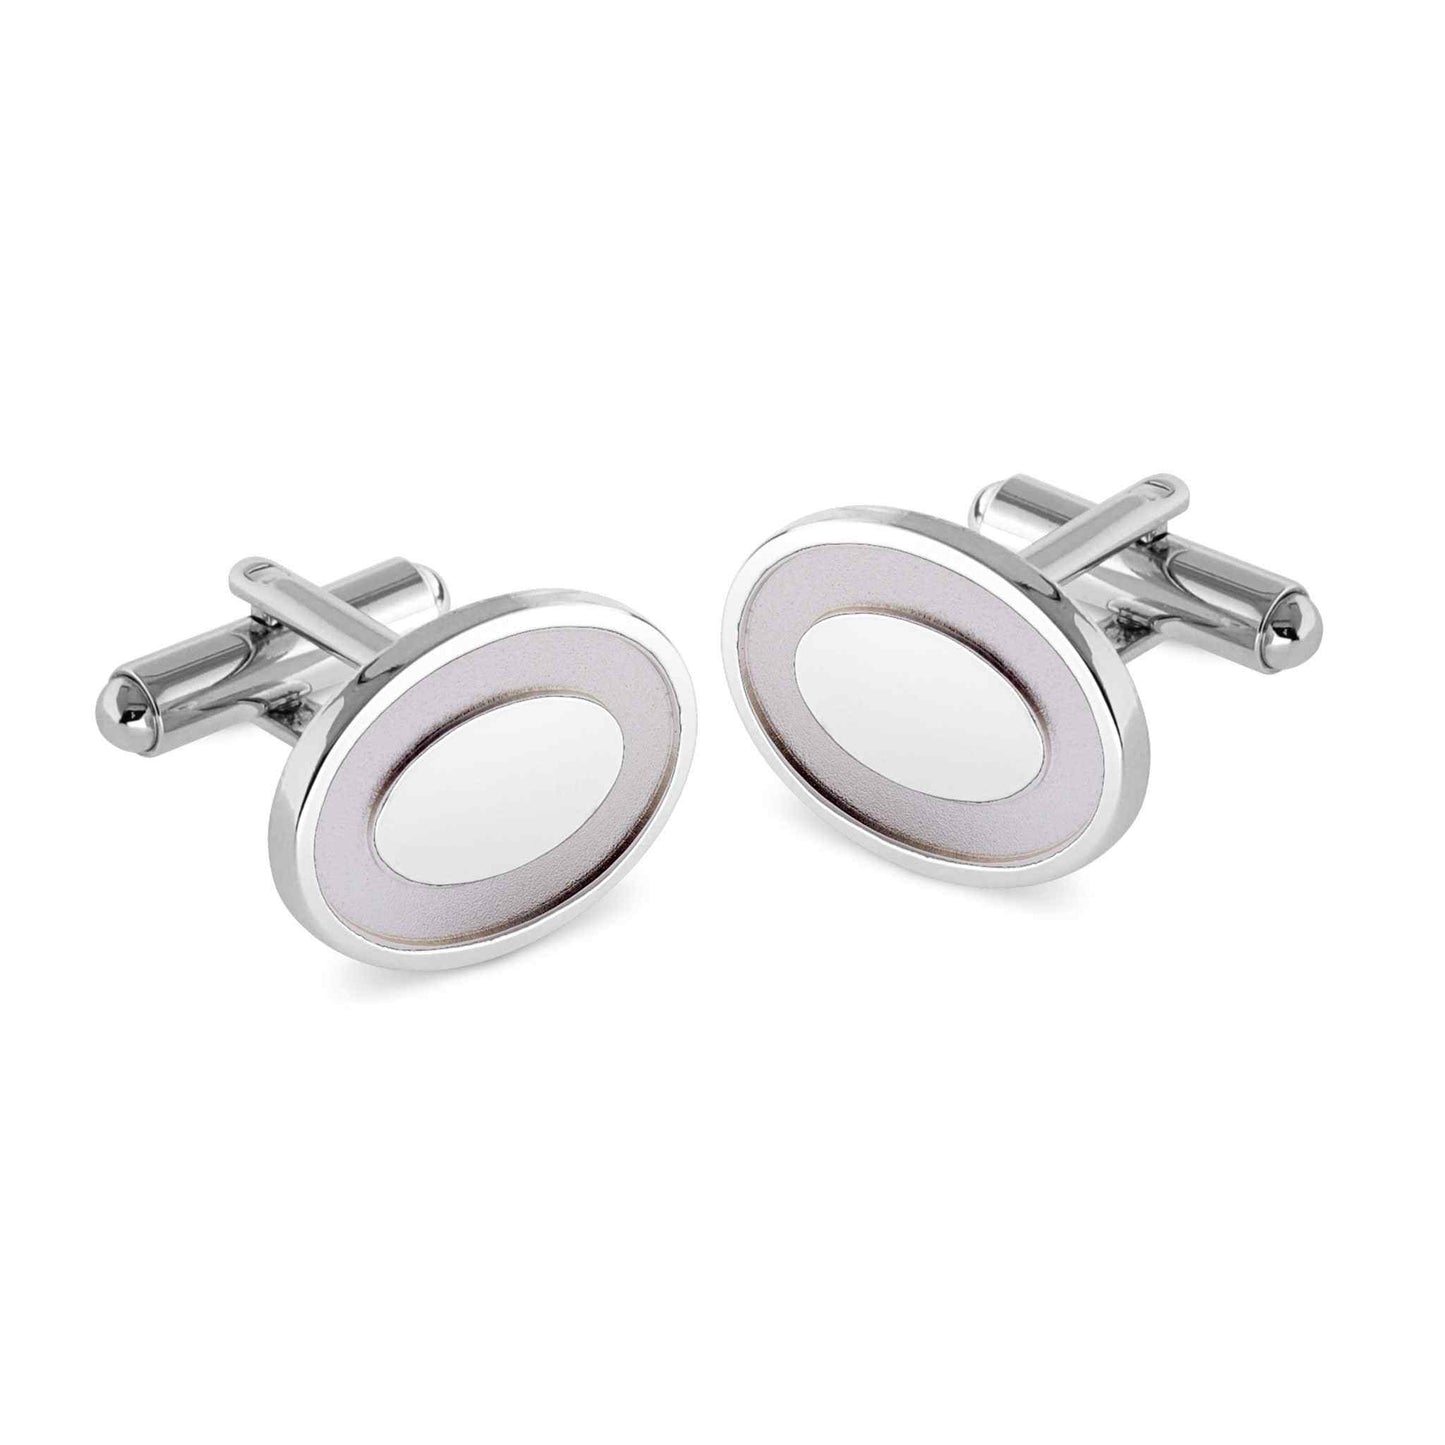 A oval cufflinks with oval center displayed on a neutral white background.